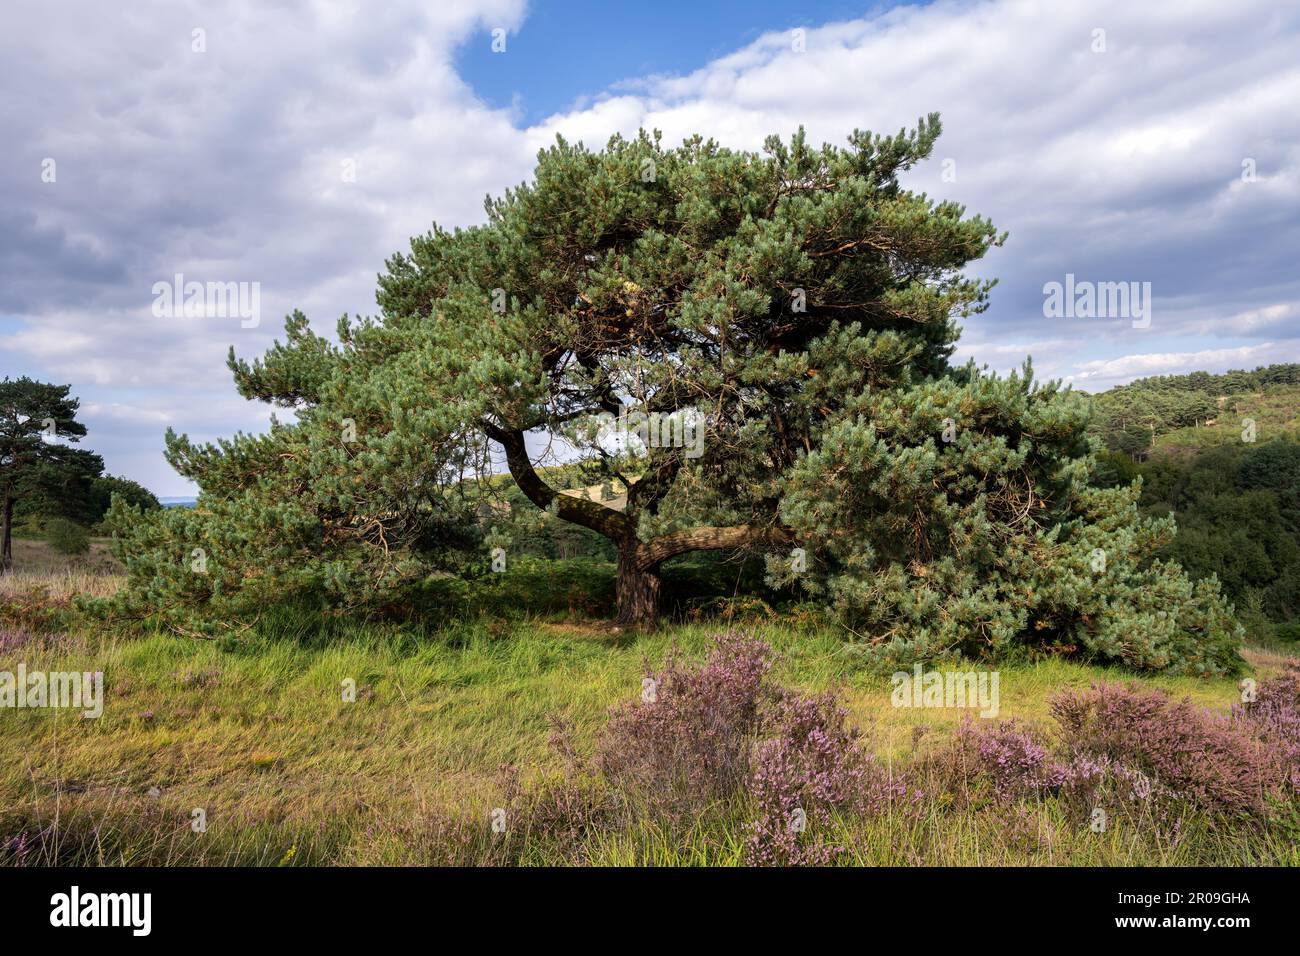 Beautiful Pinus sylvestris or Scots pine tree in Ashdown Forest on a cloudy summer afternoon, East Sussex, South East England Stock Photo